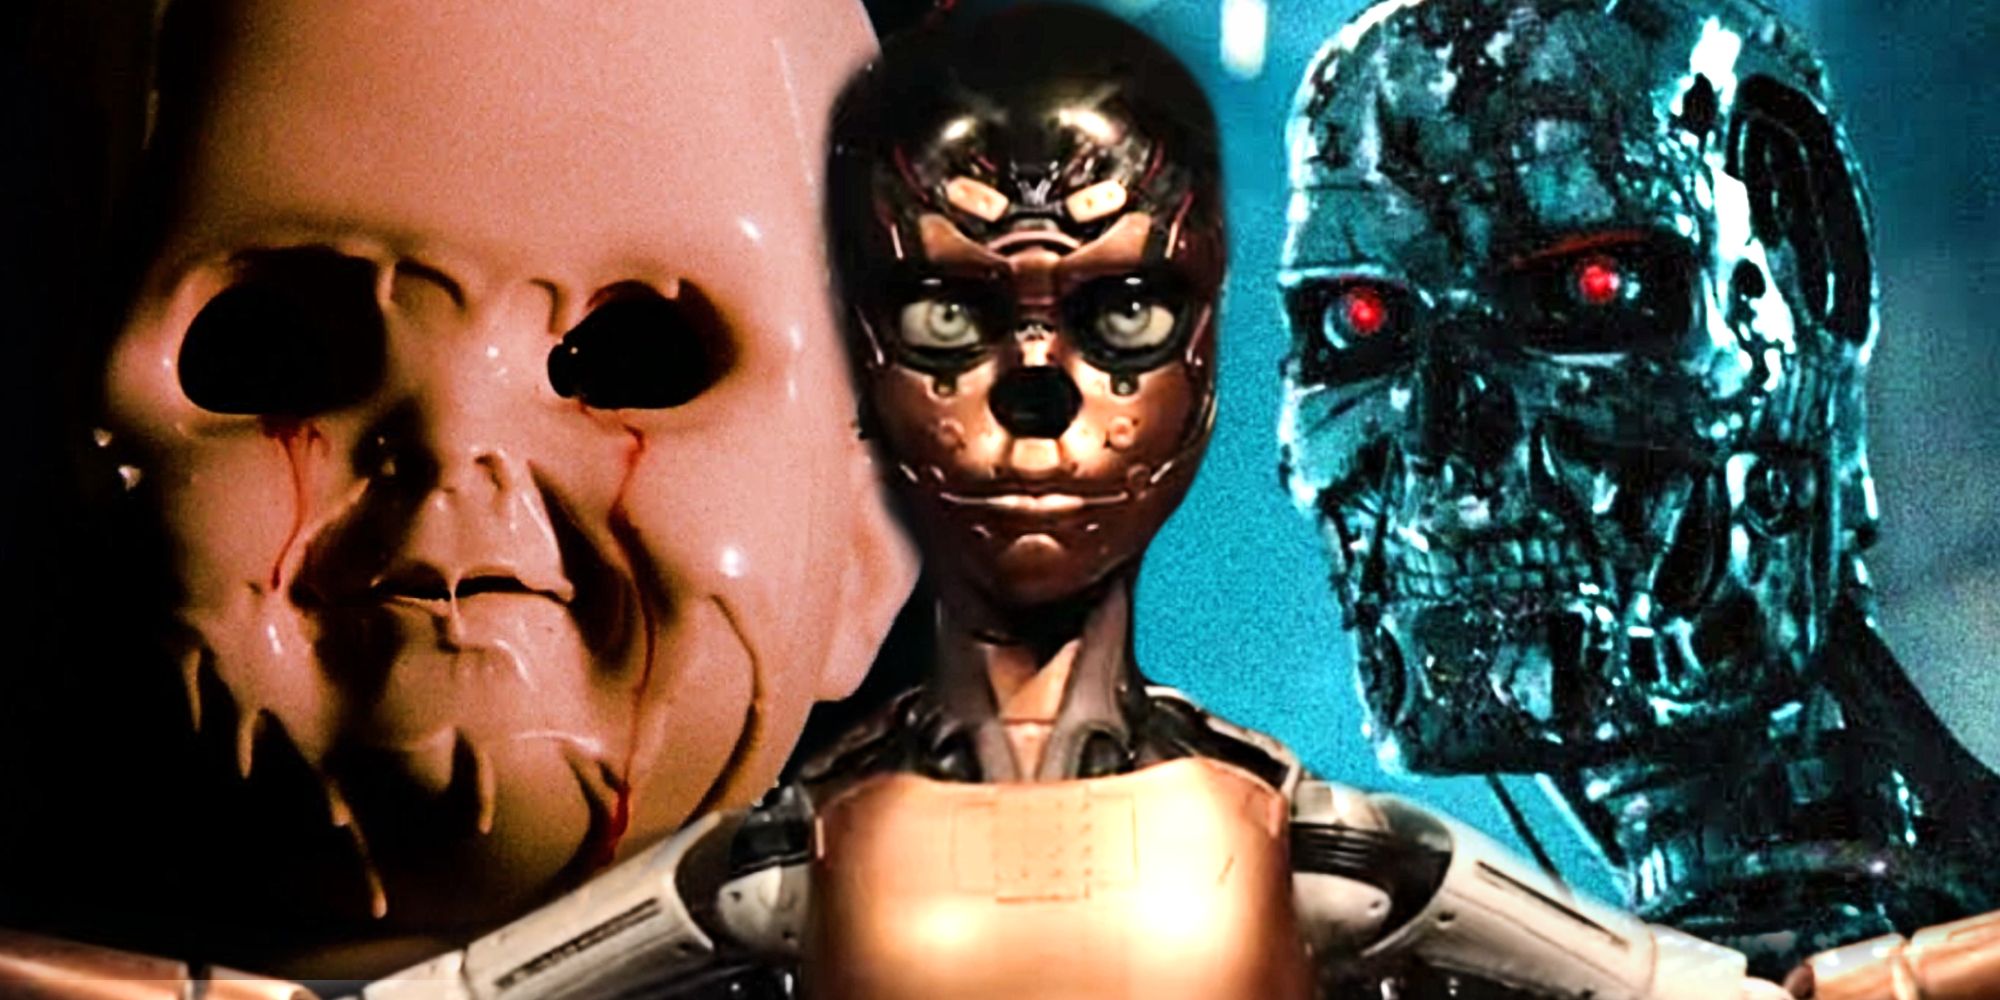 The creation of the Chucky doll, M3GAN's robot, and the T-800 Terminator